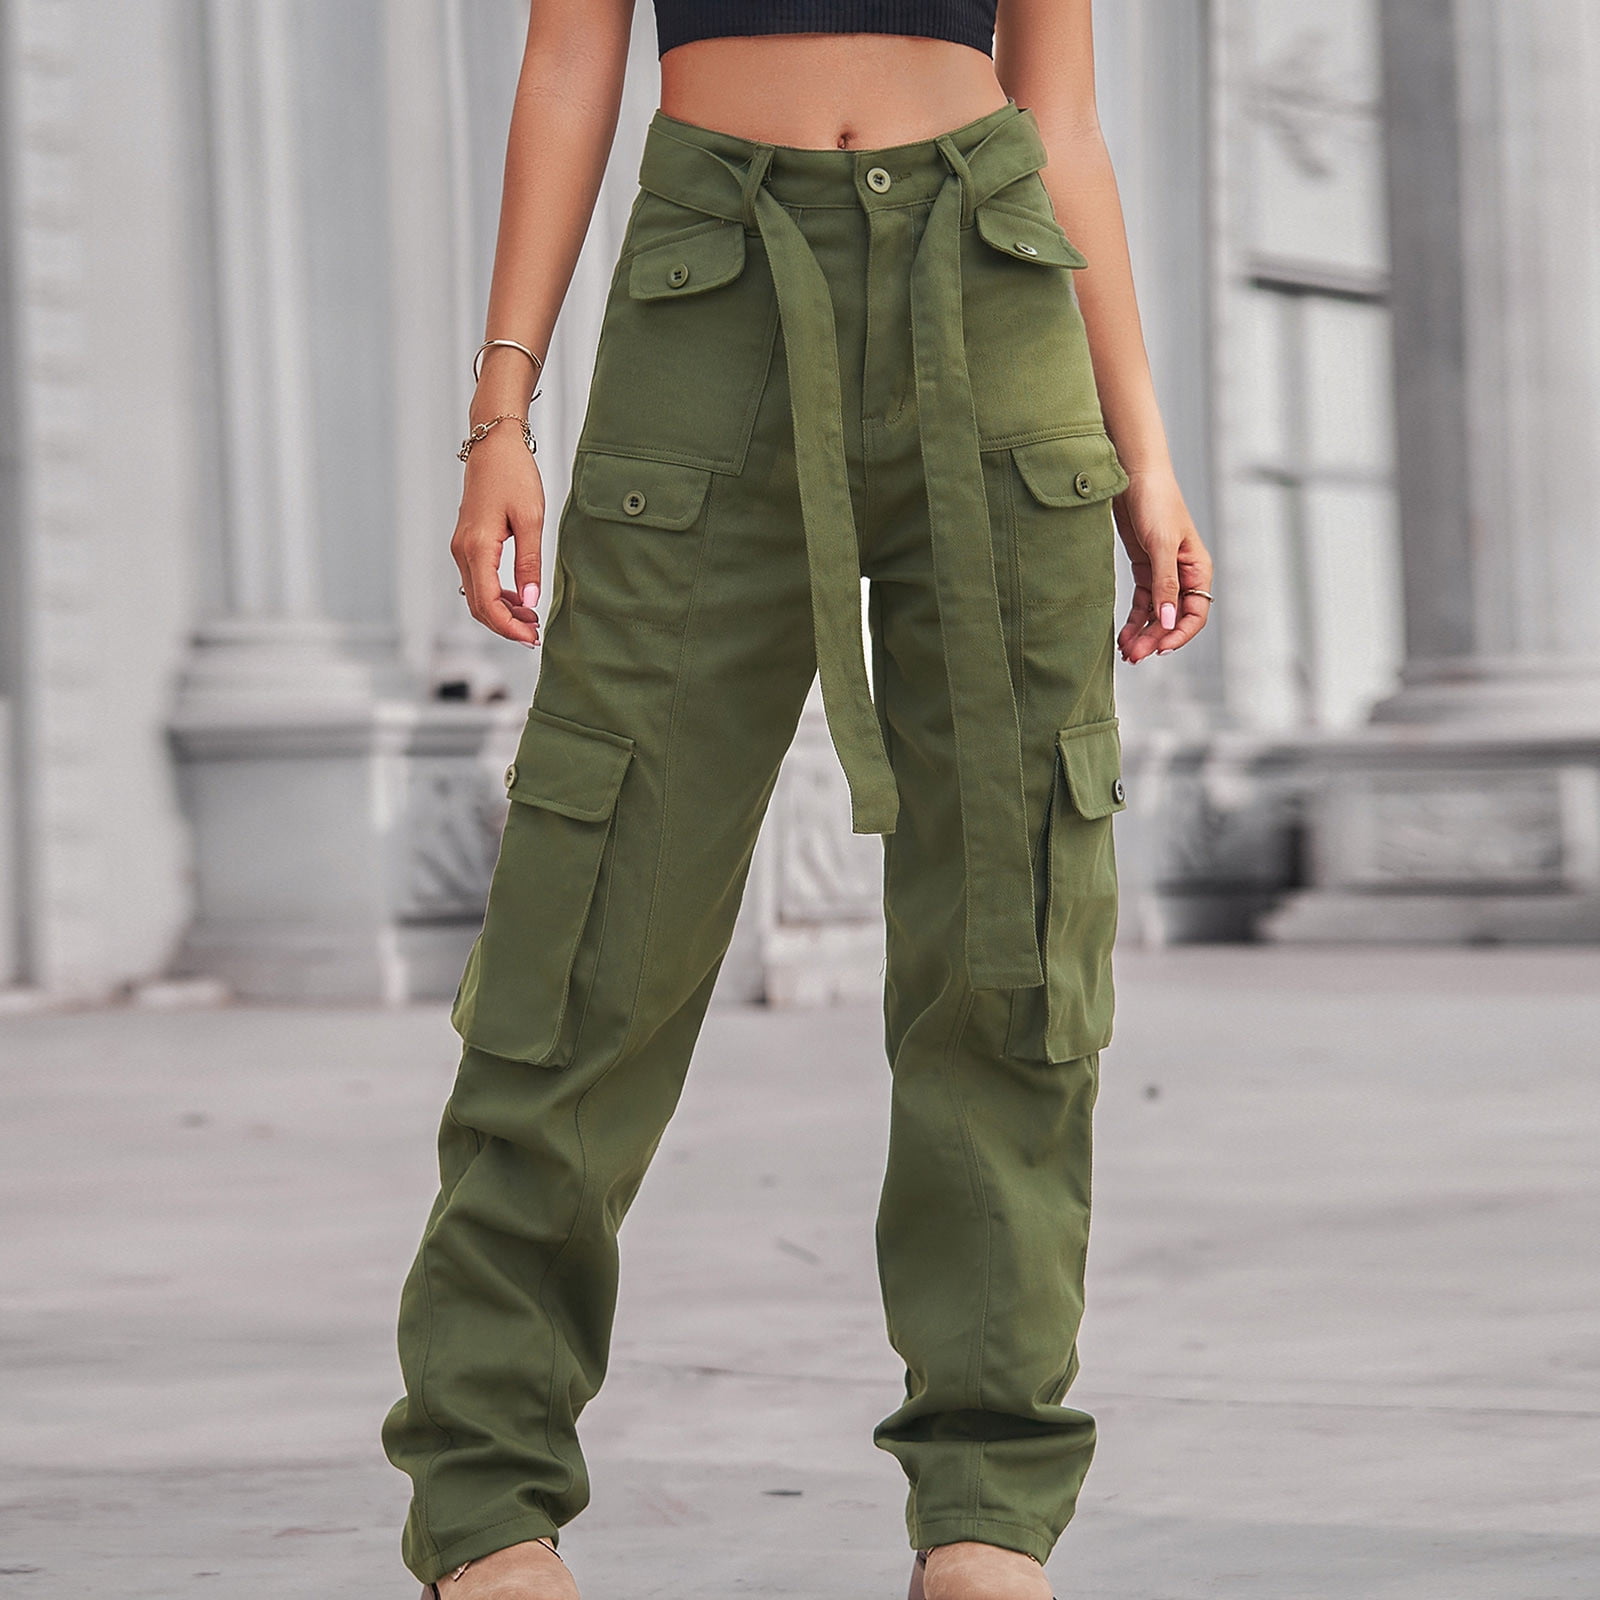 Pants Choice Overalls Everyday Pockets Cargo Work Casual Denim s Trousers Hippie Long Black Straight Event 27-Gray With A for Wear Solid Casual Popular Loose Punk Jogger YWDJ Pants Womens Pant Leg